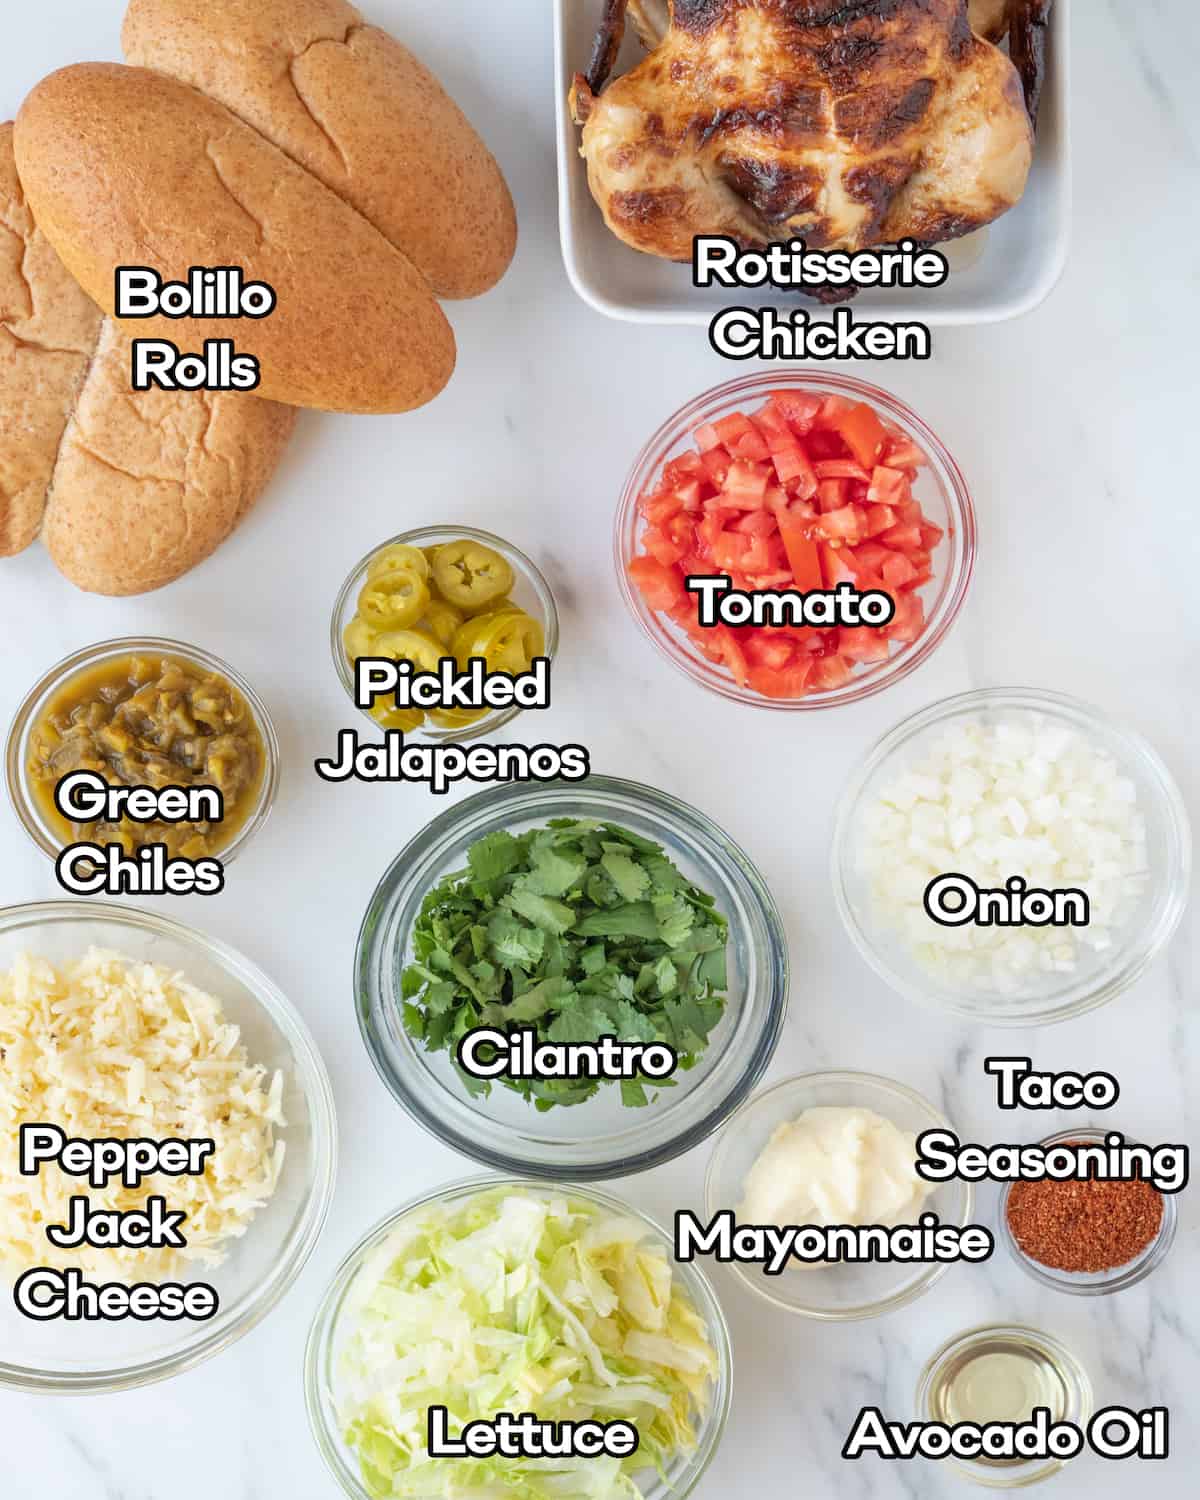 Every ingredient you need to make this recipe such as bolillo rolls, rotisserie chicken, green chiles, pickled jalapeños, tomatoes, onion, cilantro leaves, pepper jack cheese, mayonnaise, taco seasoning, lettuce, and avocado oil in individual bowls on a white countertop. 